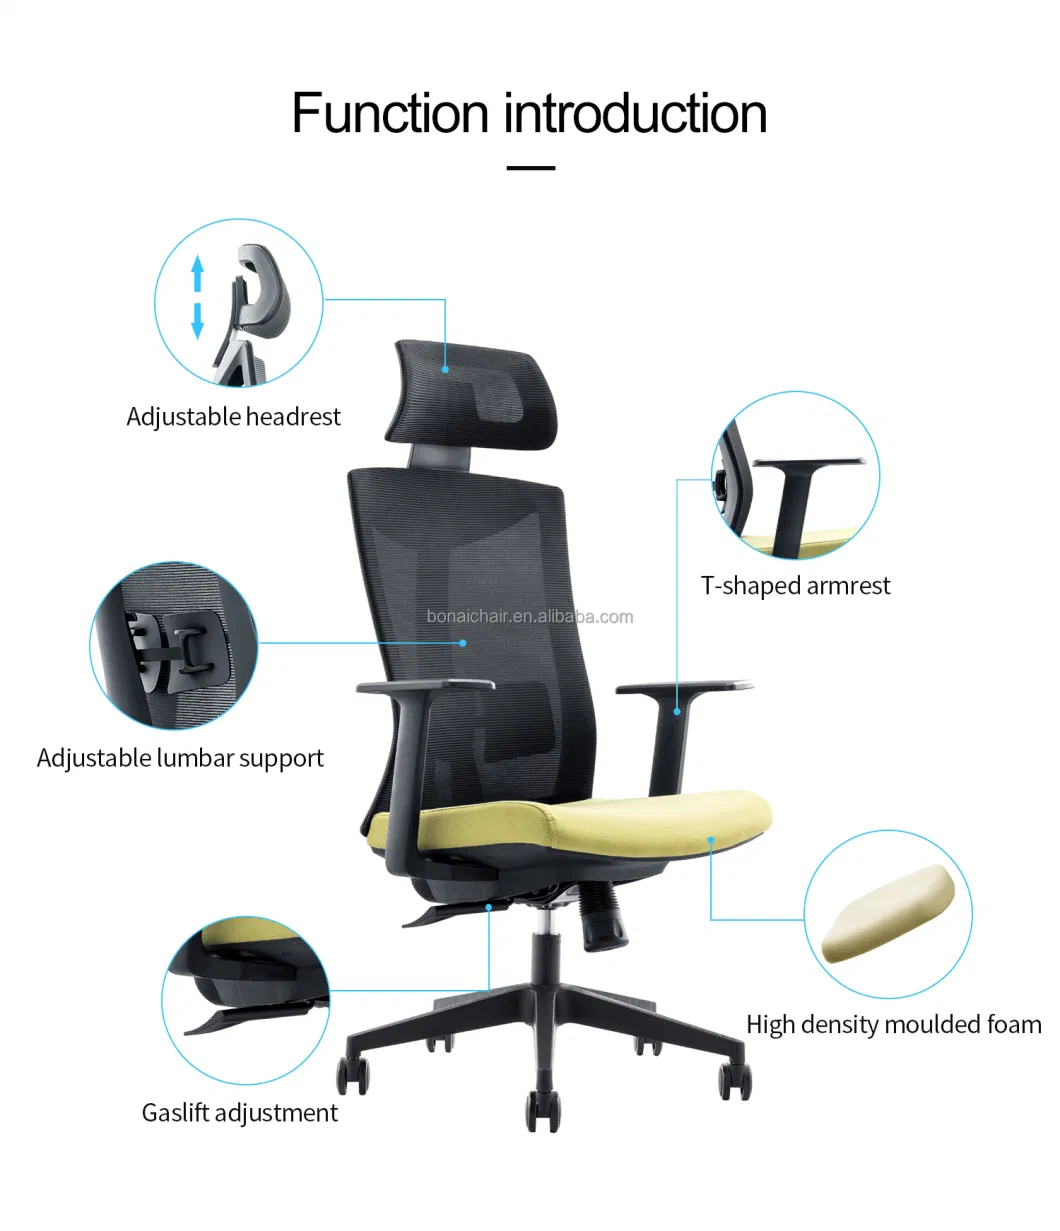 Cheap Price Swivel Rocking Staff Living Room Gaming Desk Lift Mesh Staff Office Computer Chair